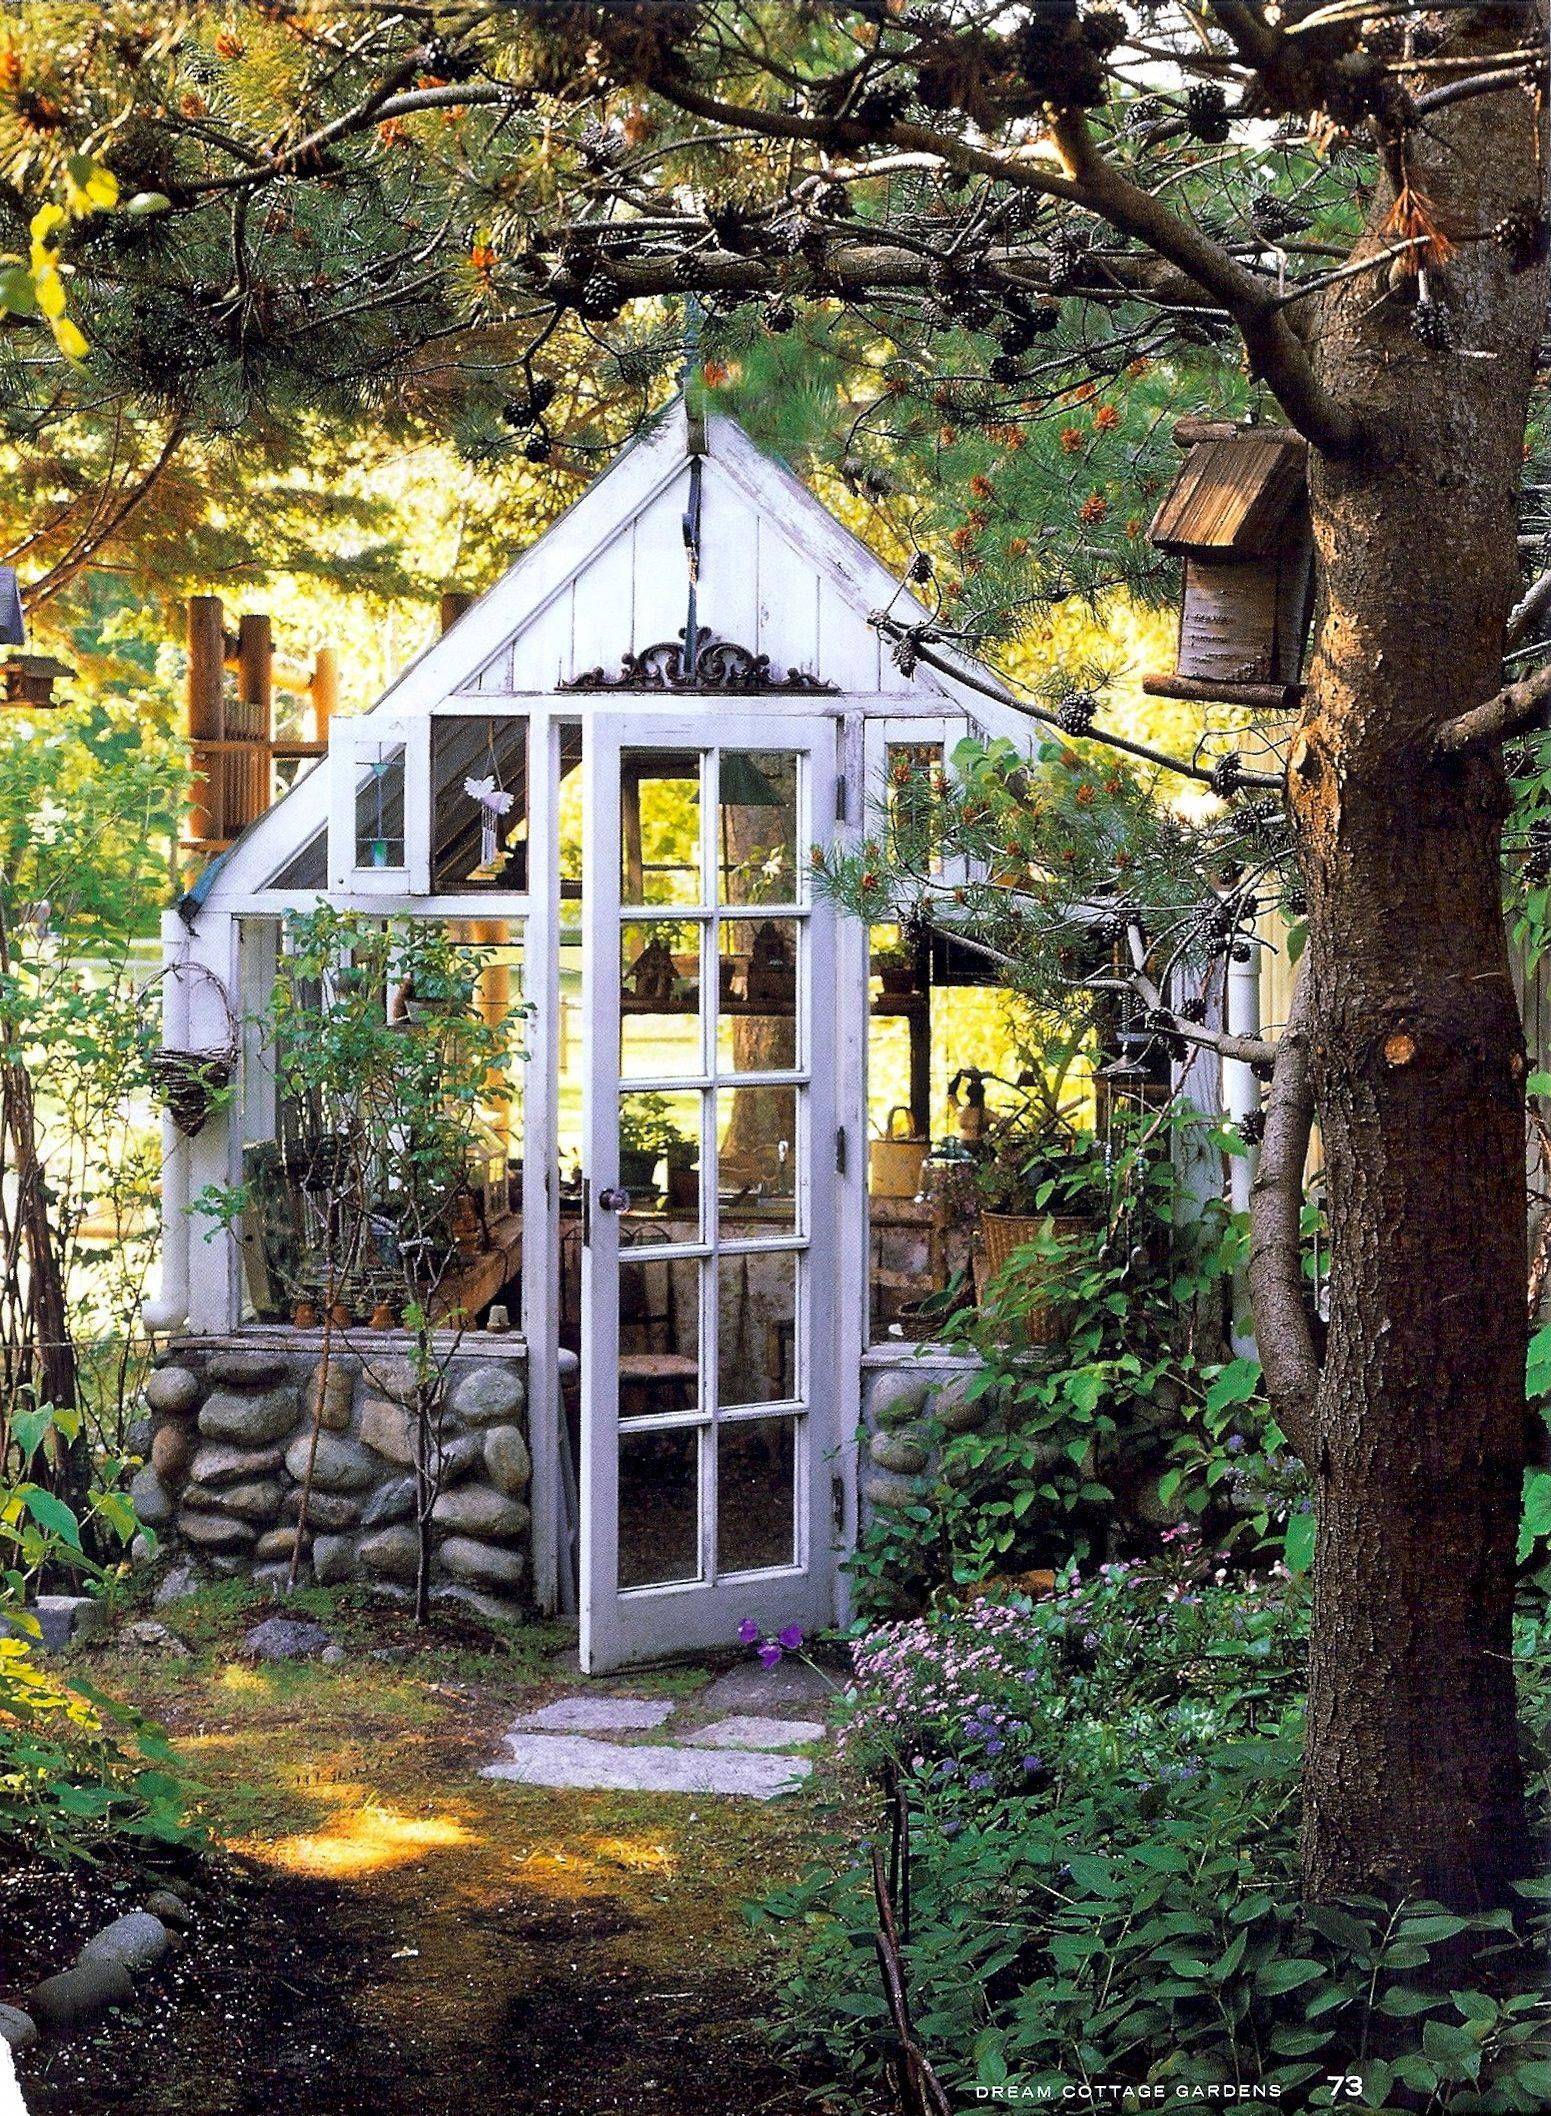 This Little Potting Shed